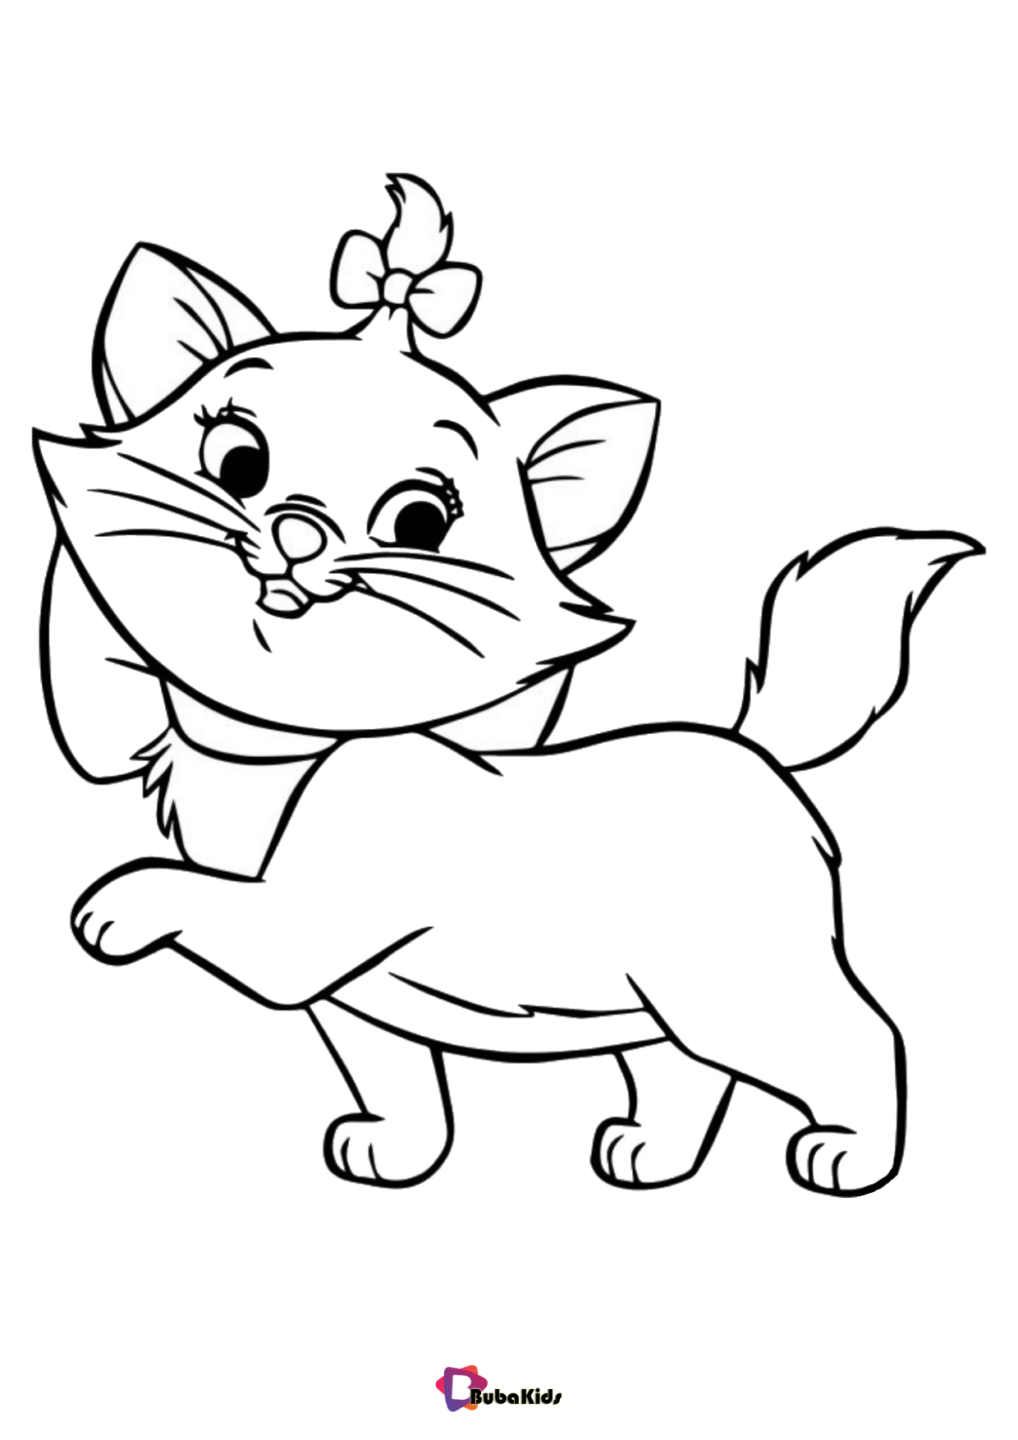 Download Cut lovely cat coloring page | BubaKids.com